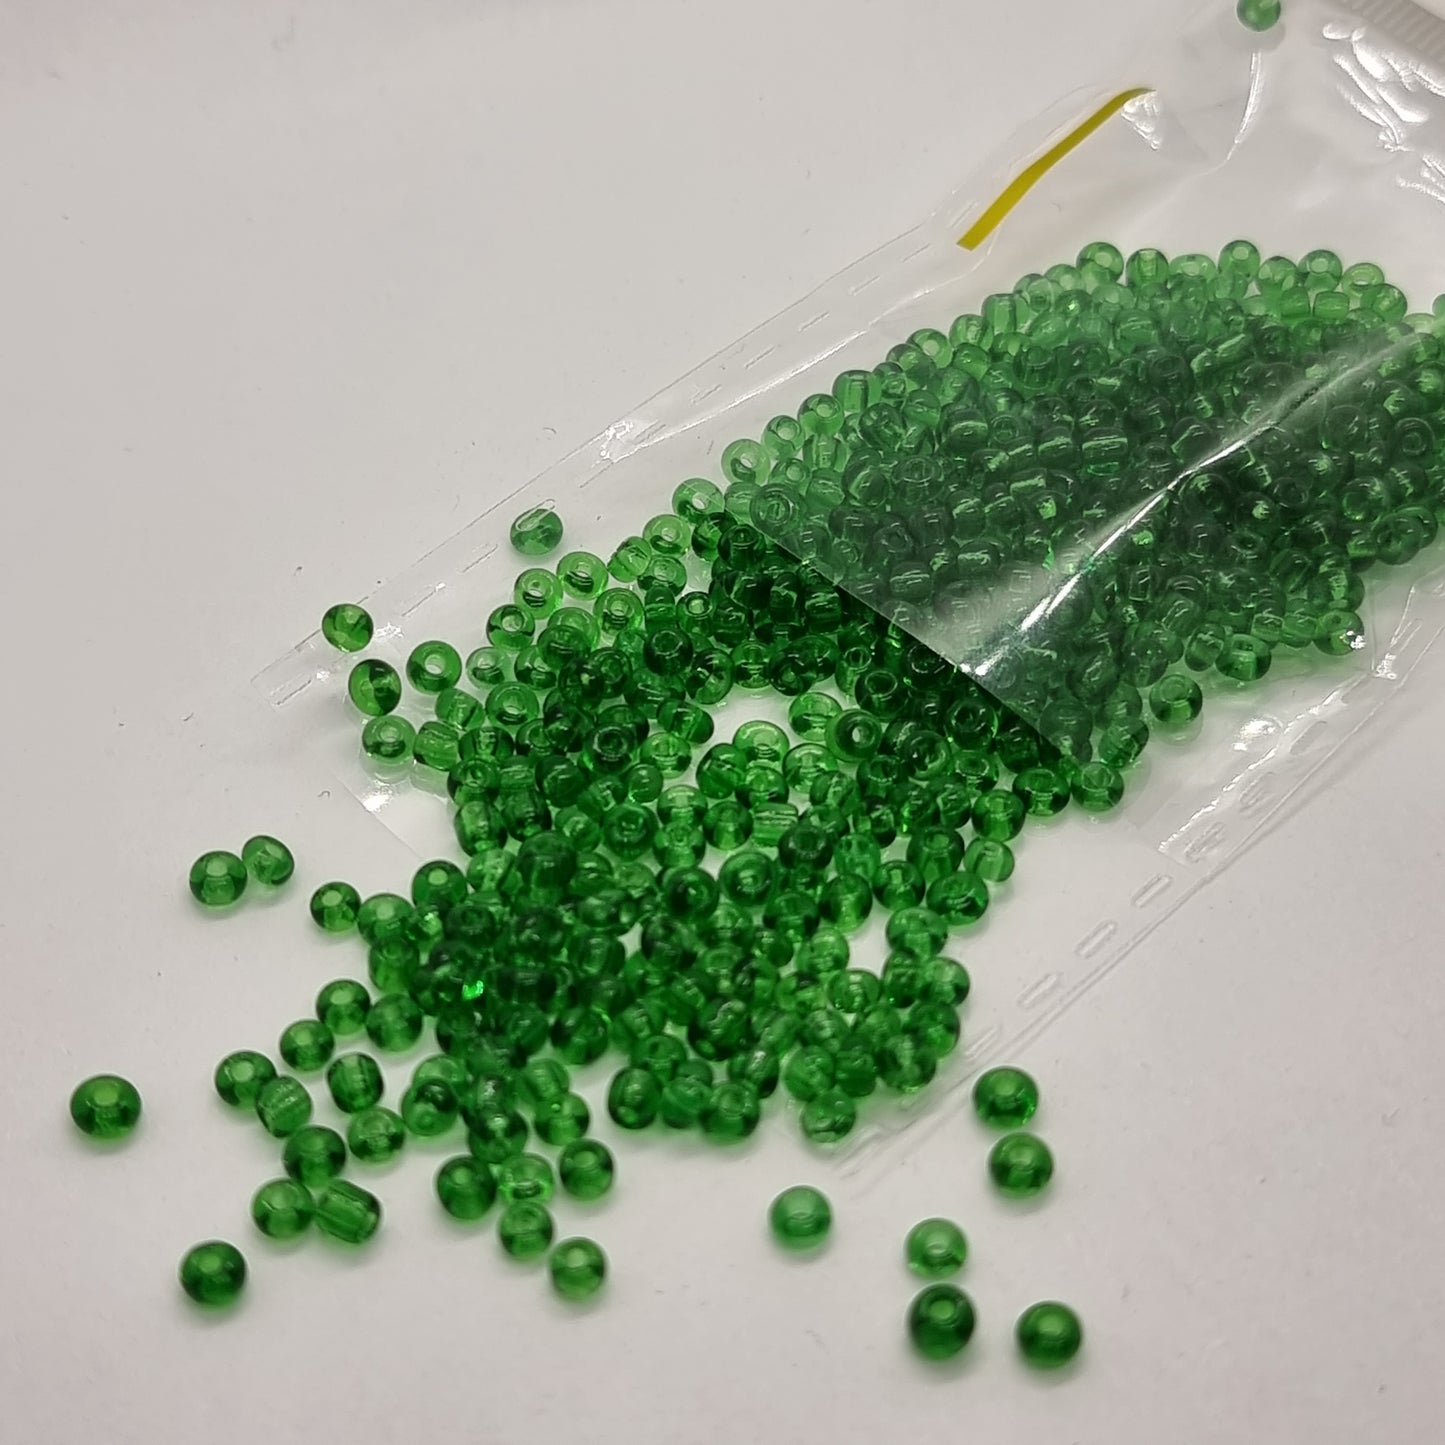 15g 2mm Green Transparent Seed Beads